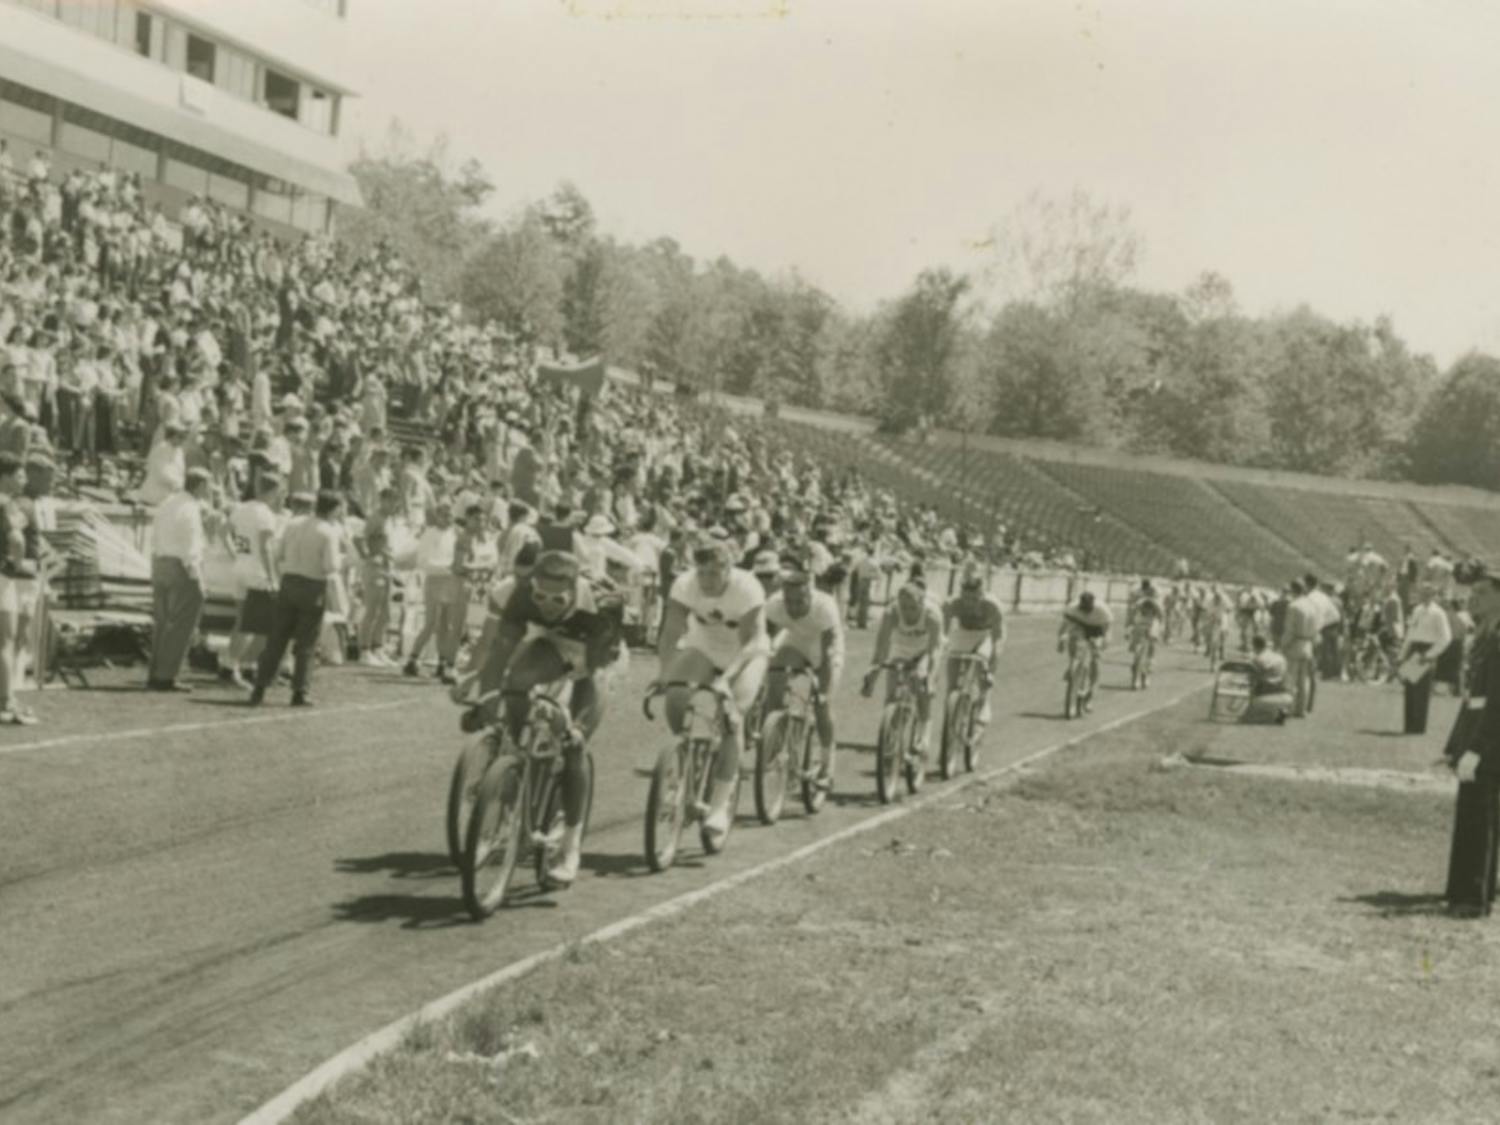 GALLERY: The Little 500 races throughout history